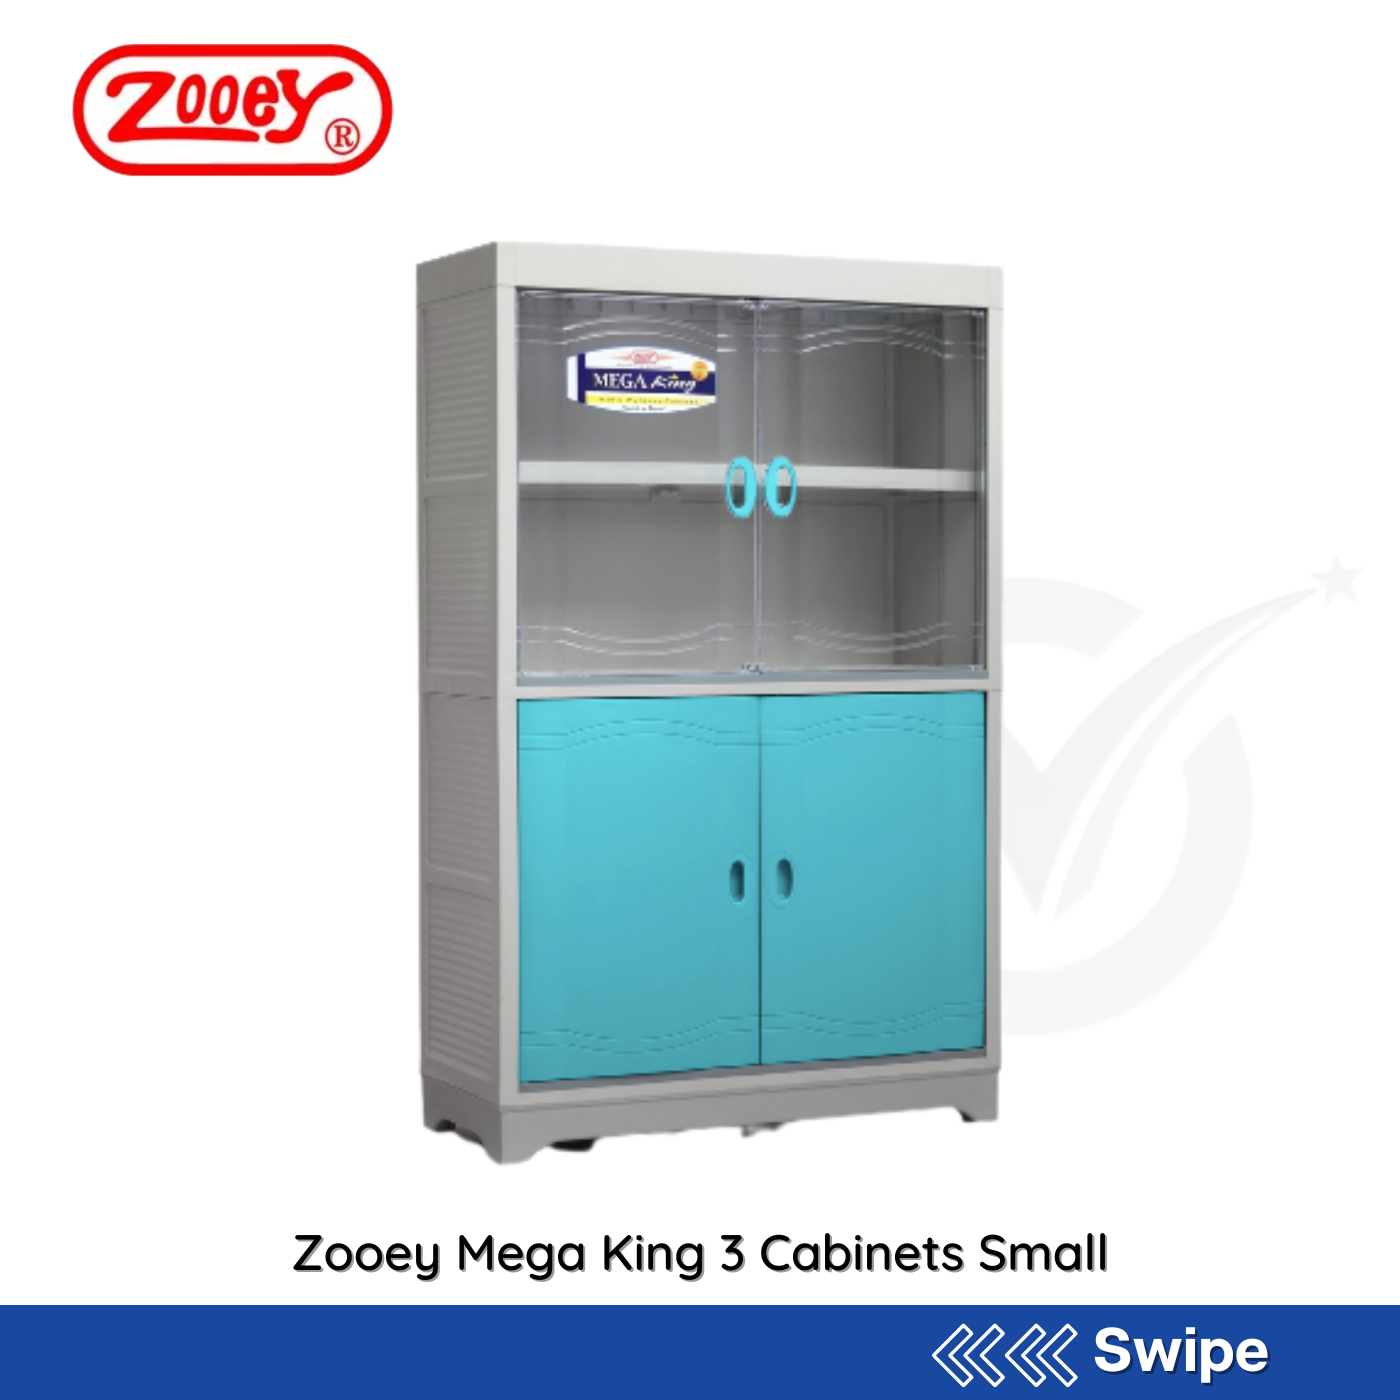 Zooey Mega King 3 Cabinets (small) - People's Choice Marketing